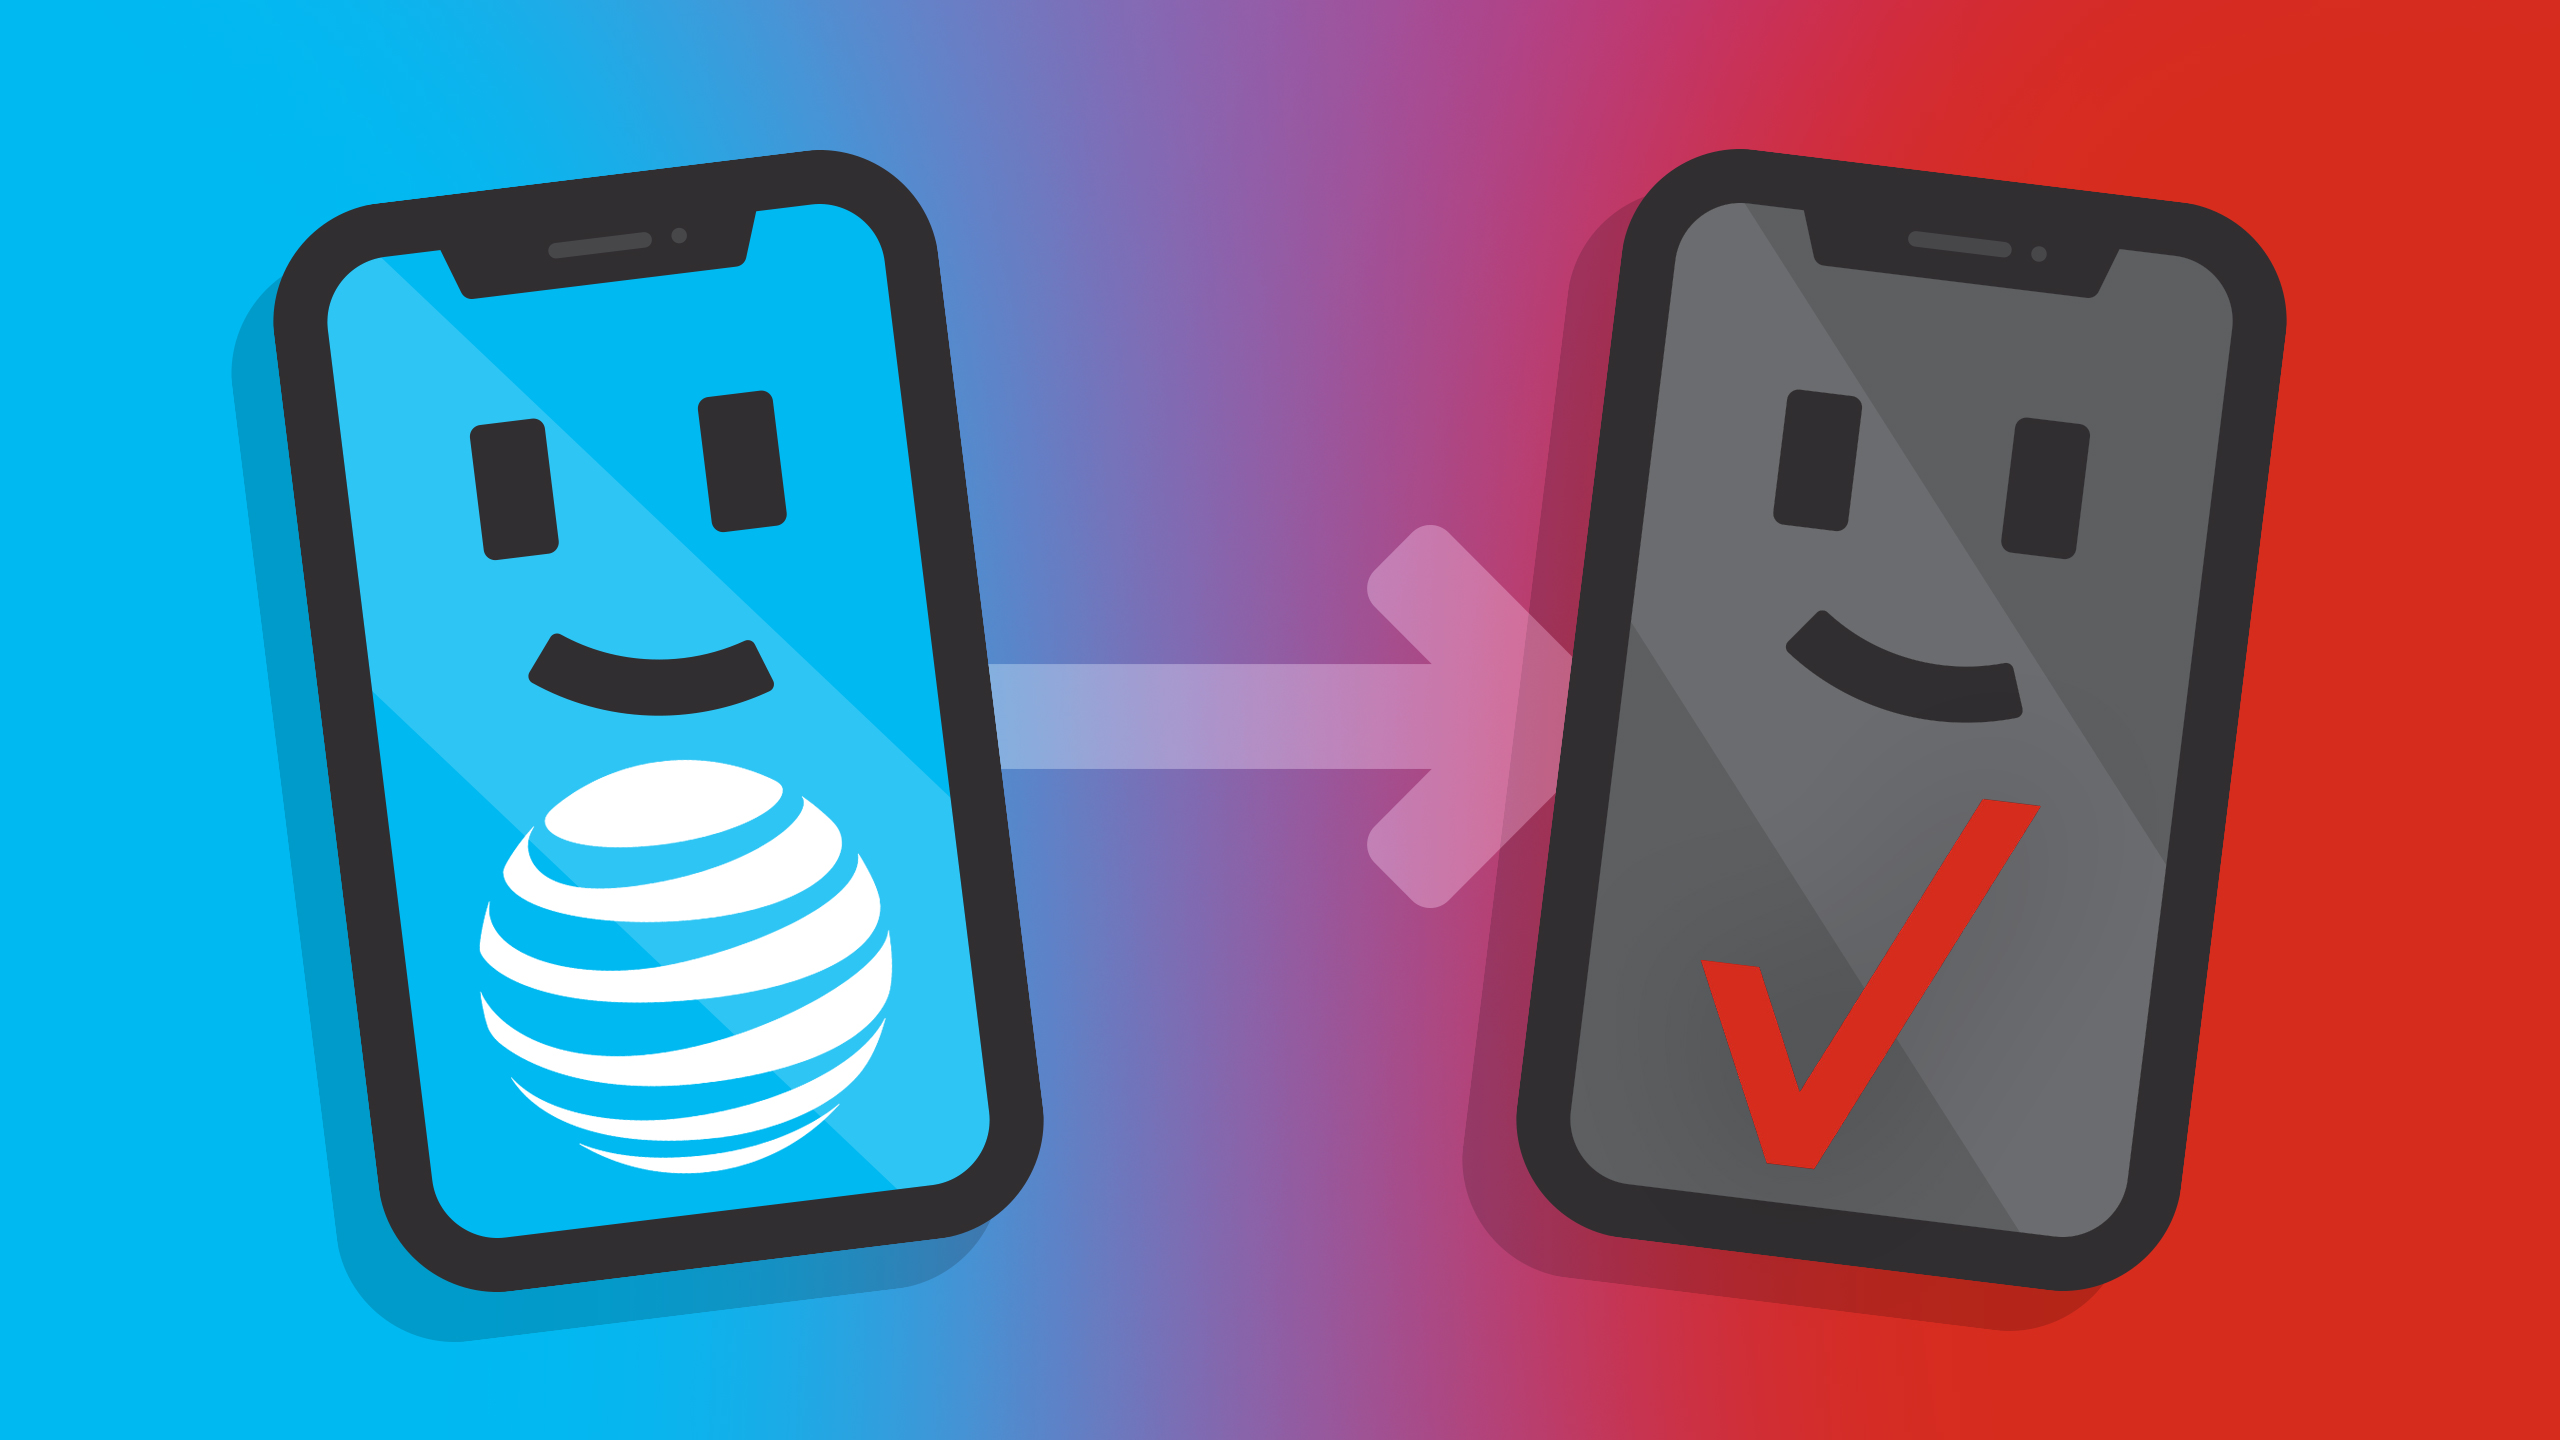 How To Switch From AT&T To Verizon [Step-By-Step Guide]